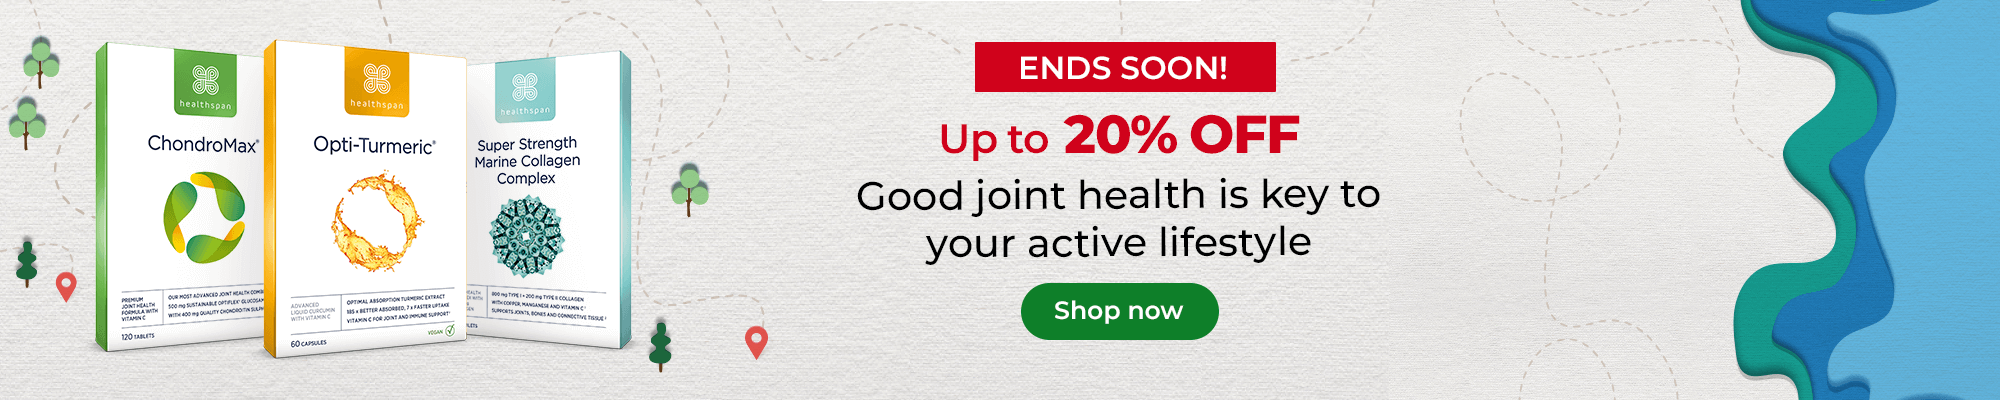 Ends soon. Up to 20% off. Good joint health is key to your active lifestyle. Shop now